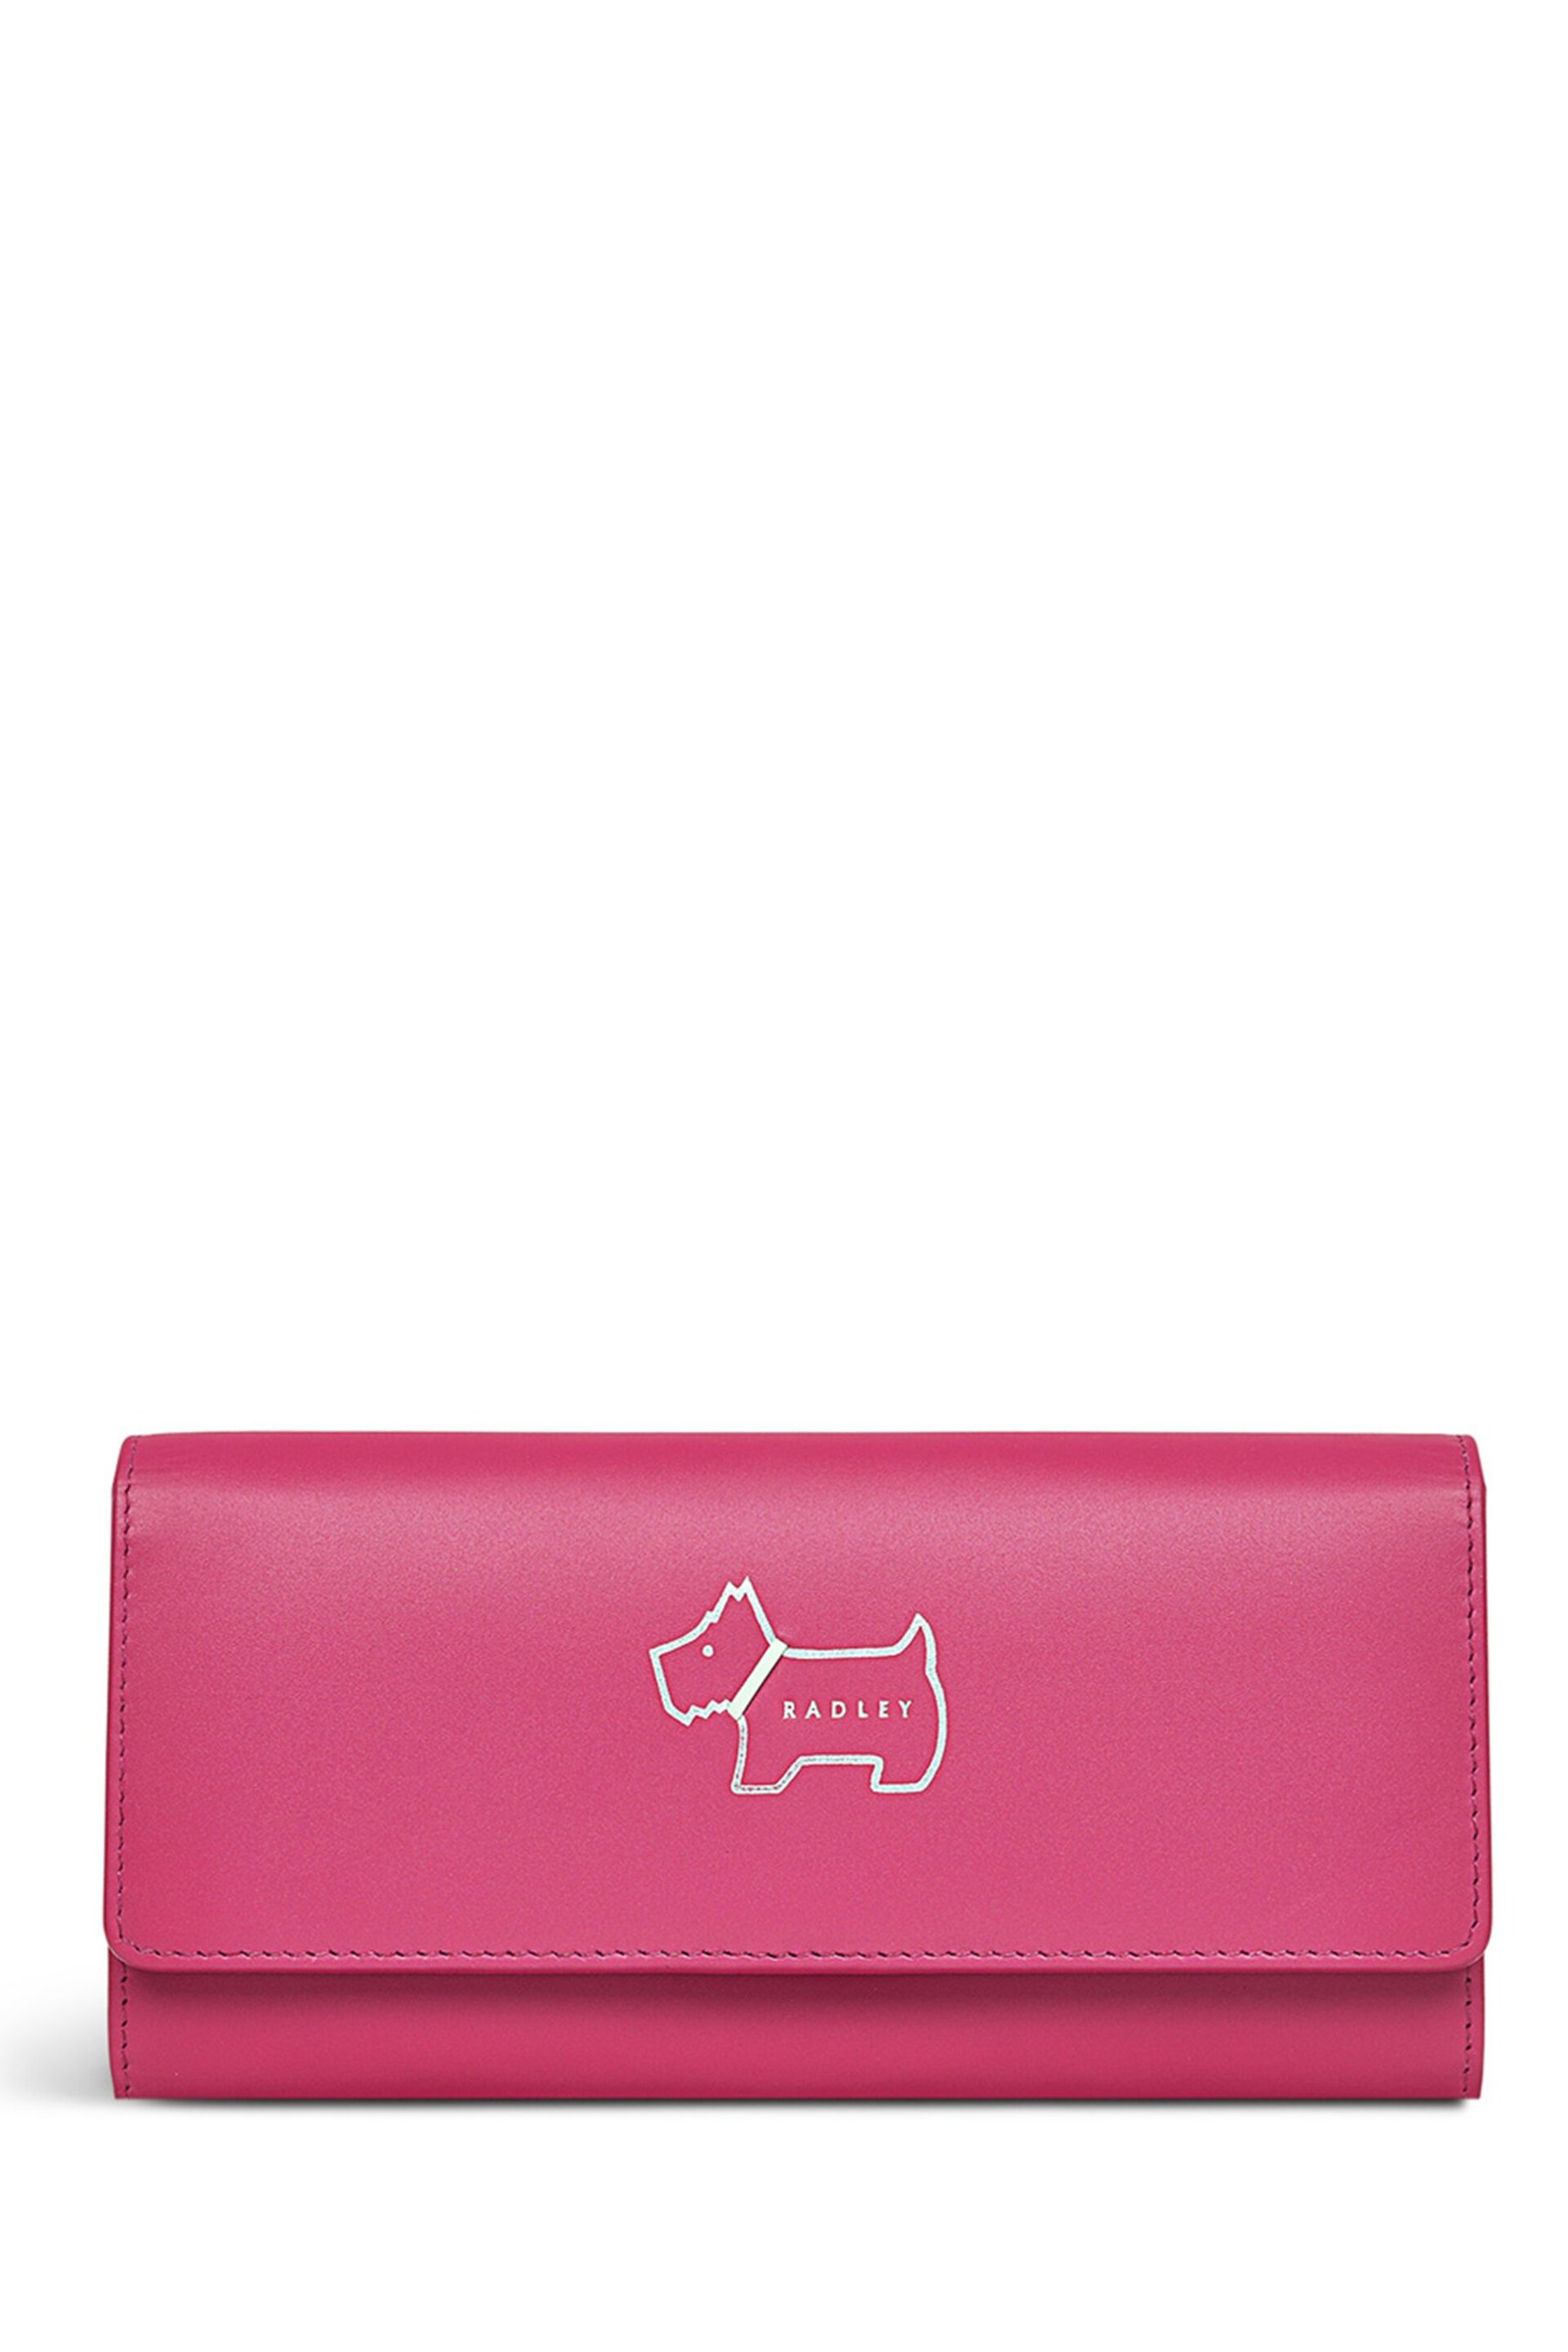 Radley London Pink Heritage Dog Outline Large Flapover Matinee Purse - Image 1 of 4